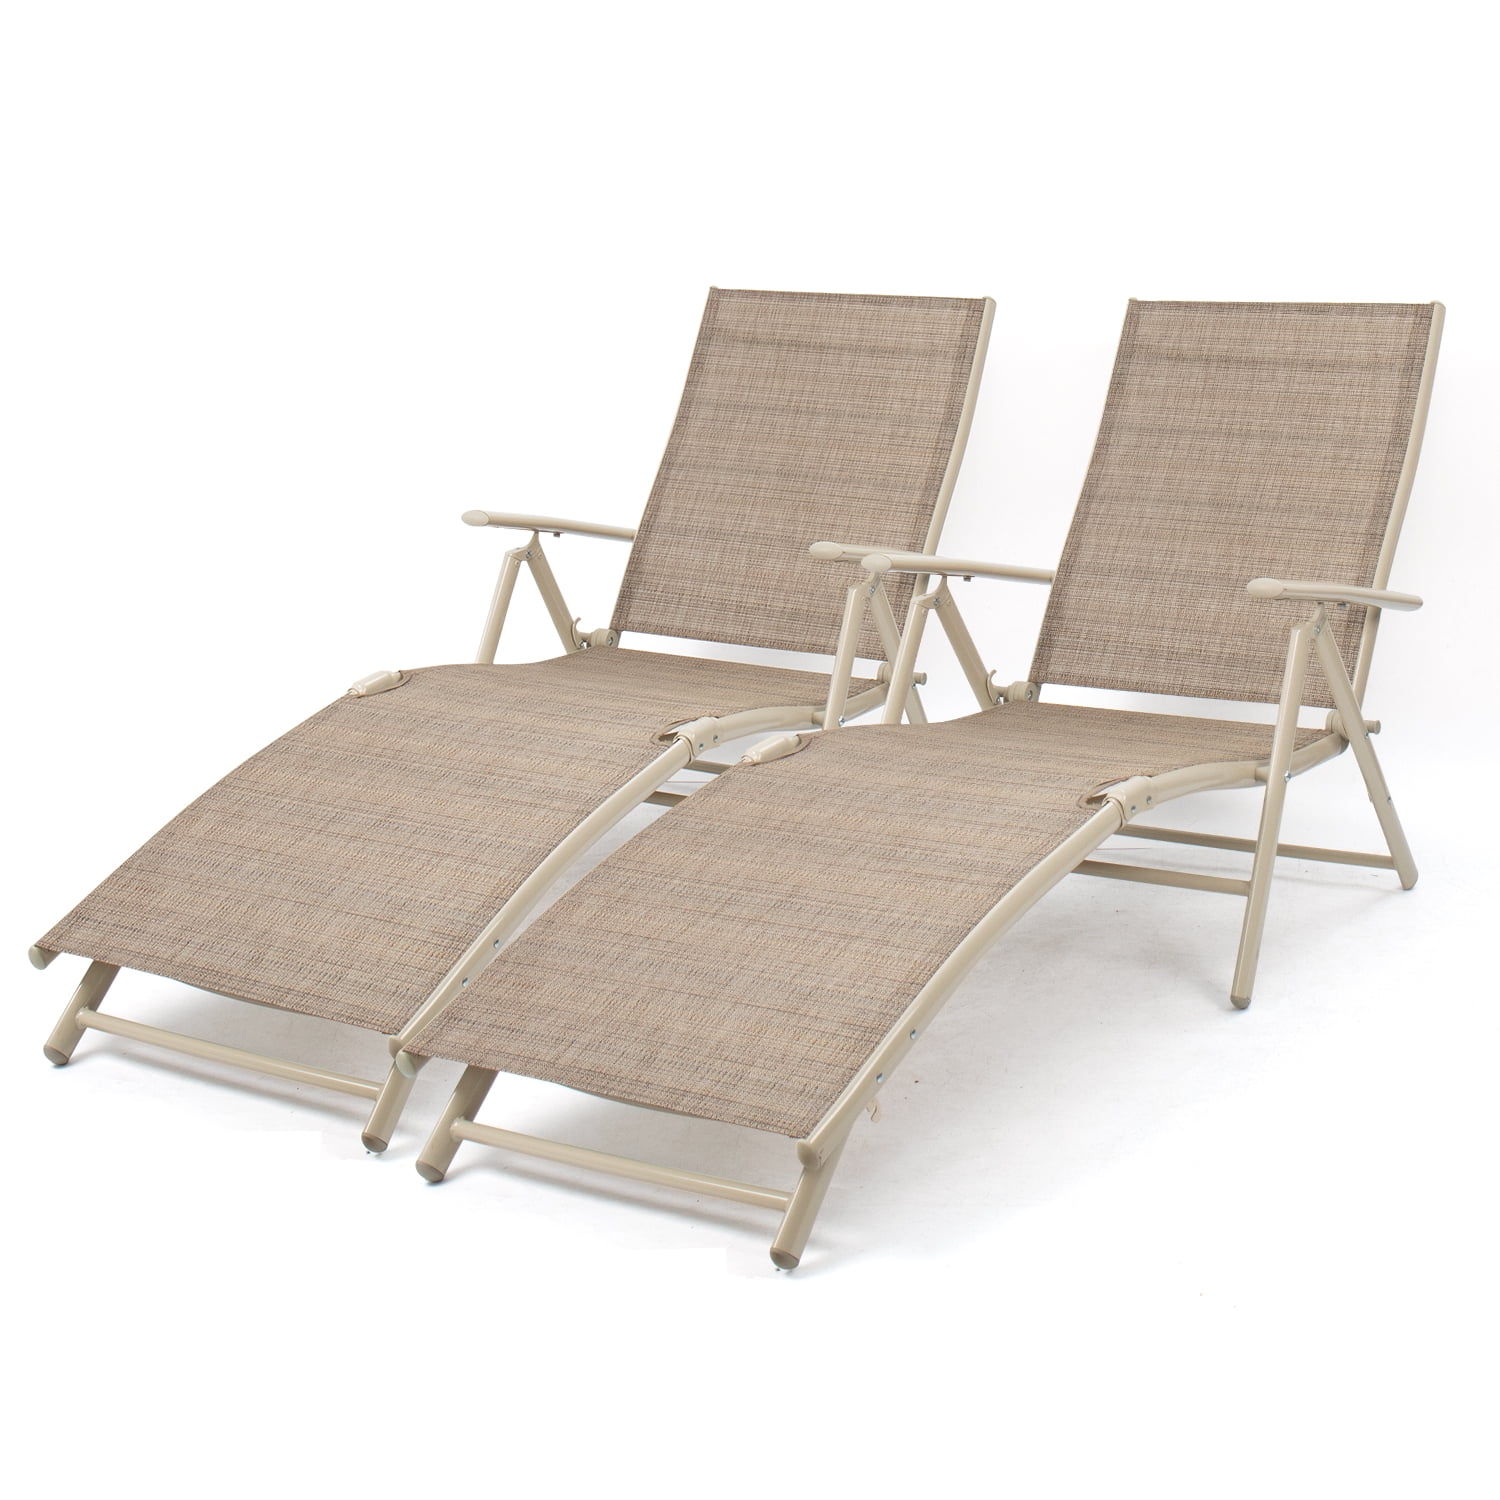 Walnew Set Of 2 Patio Lounge Chairs Adjustable Pool Chaise Folding Outdoor Recliners Beige Com - Patio Lounge Chair Set Of 2